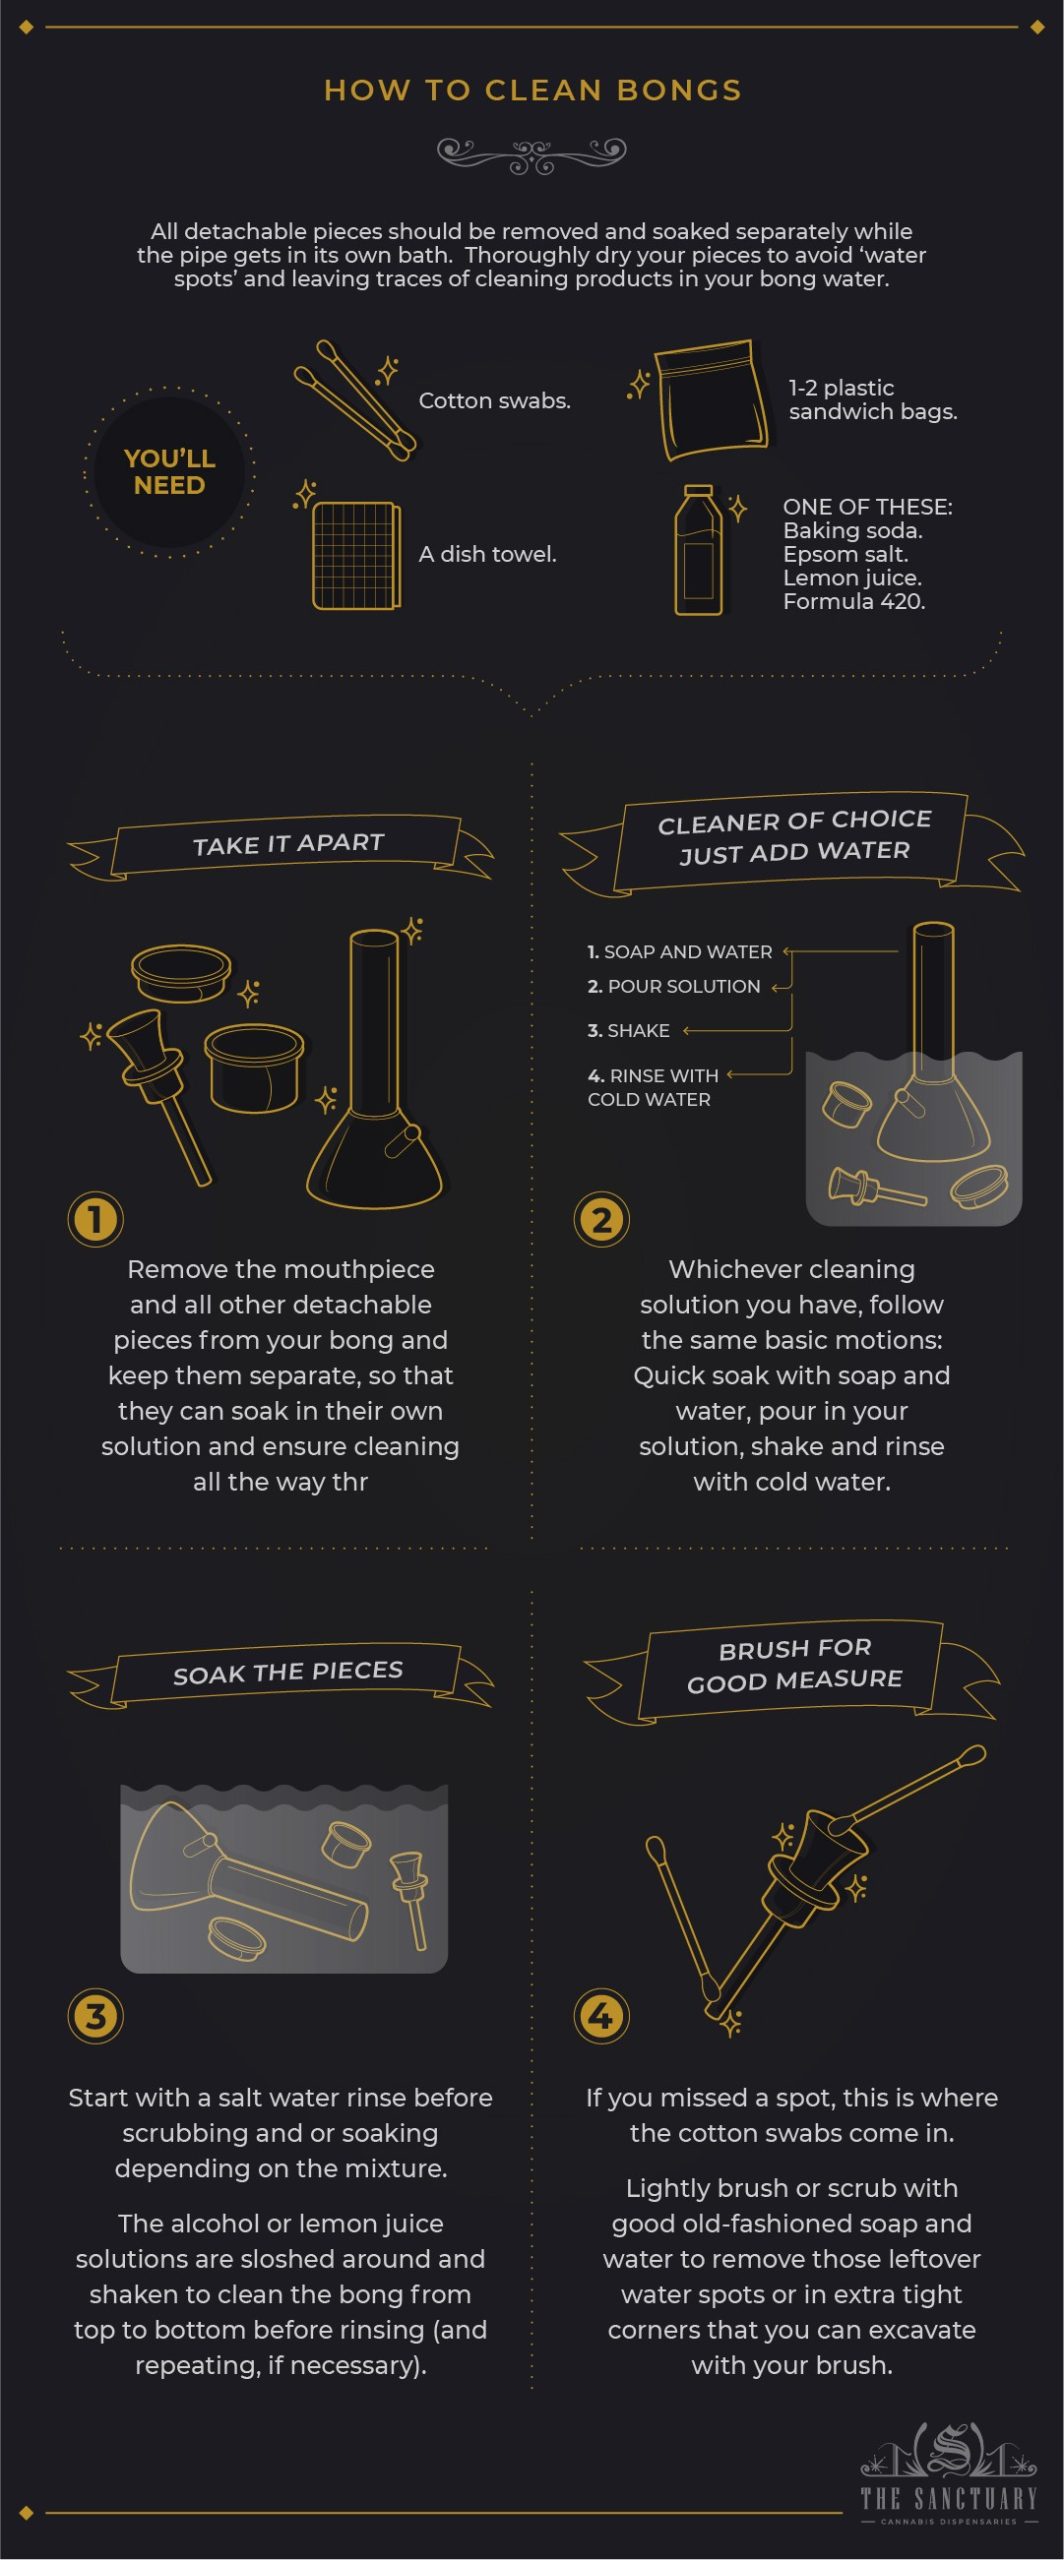 How to Clean Bongs